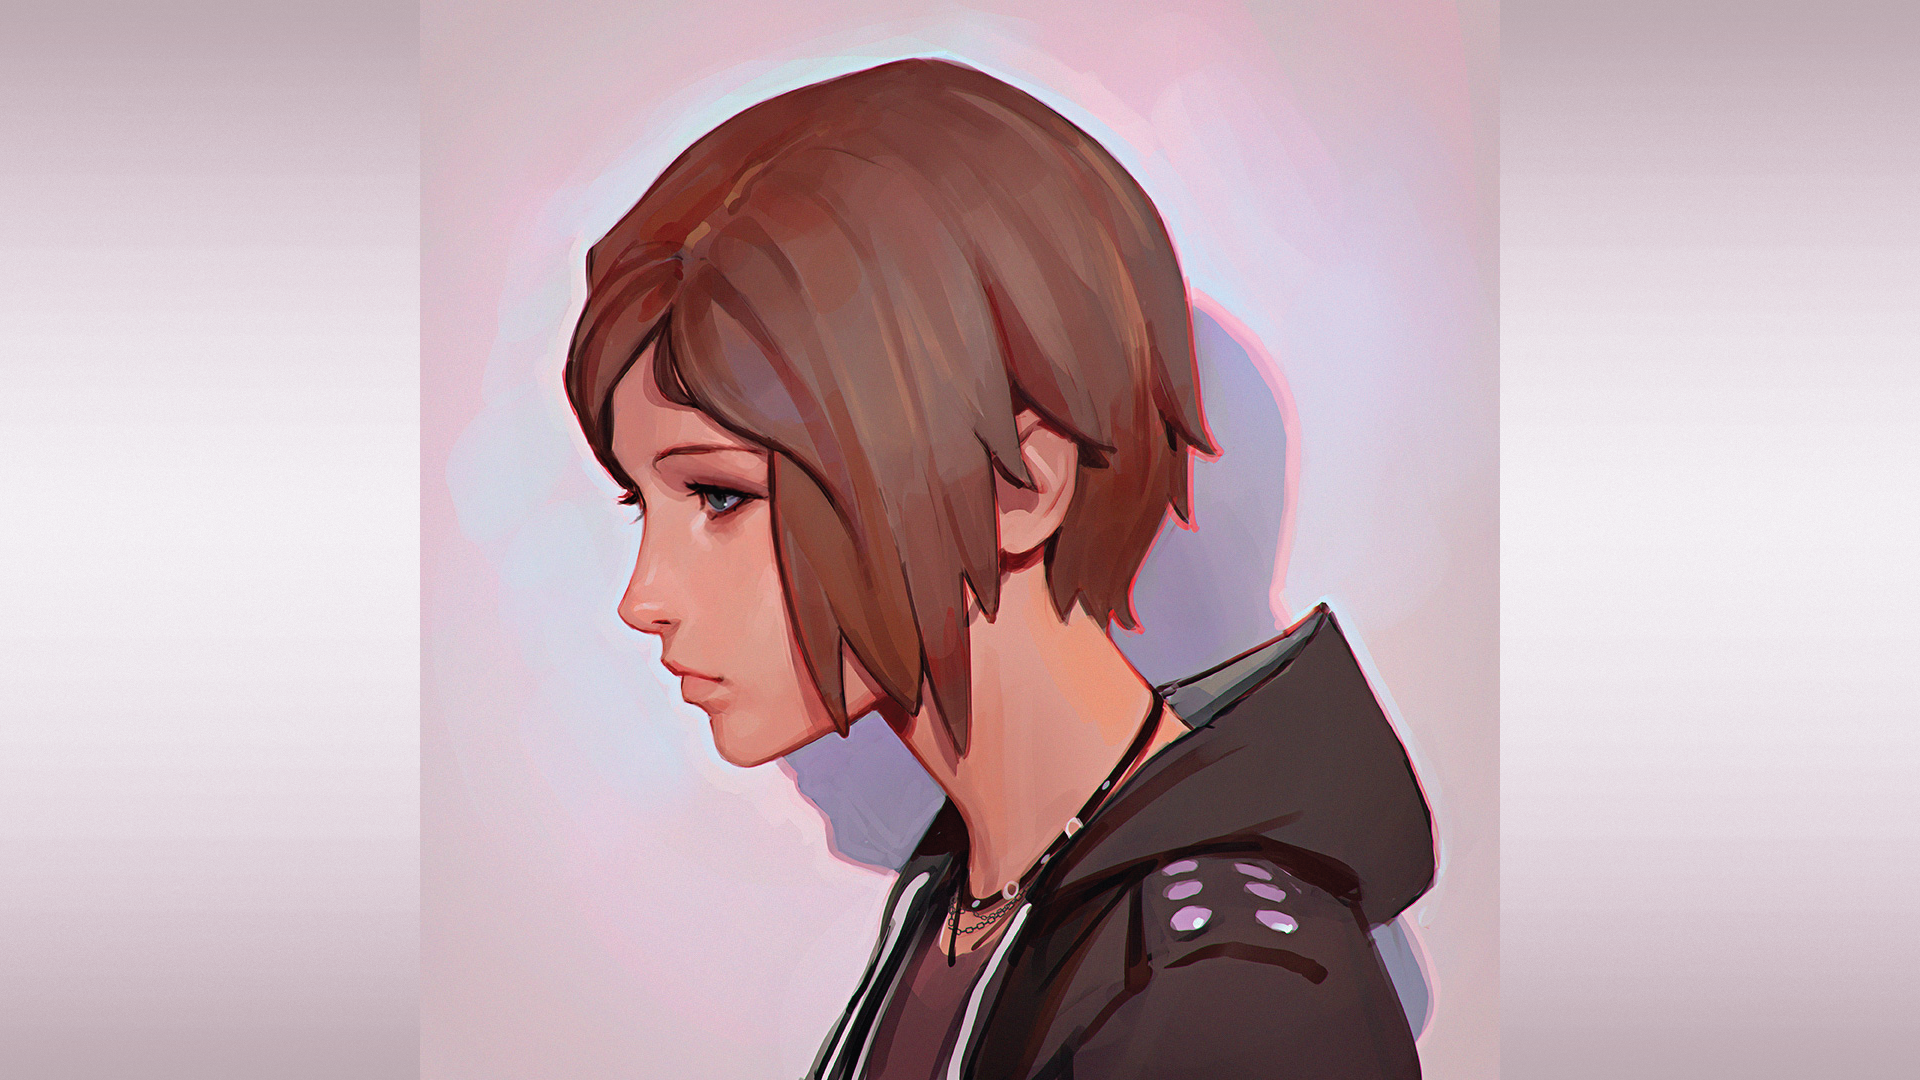 Brown Haired Female Anime Character Illustration Chloe Price Images, Photos, Reviews